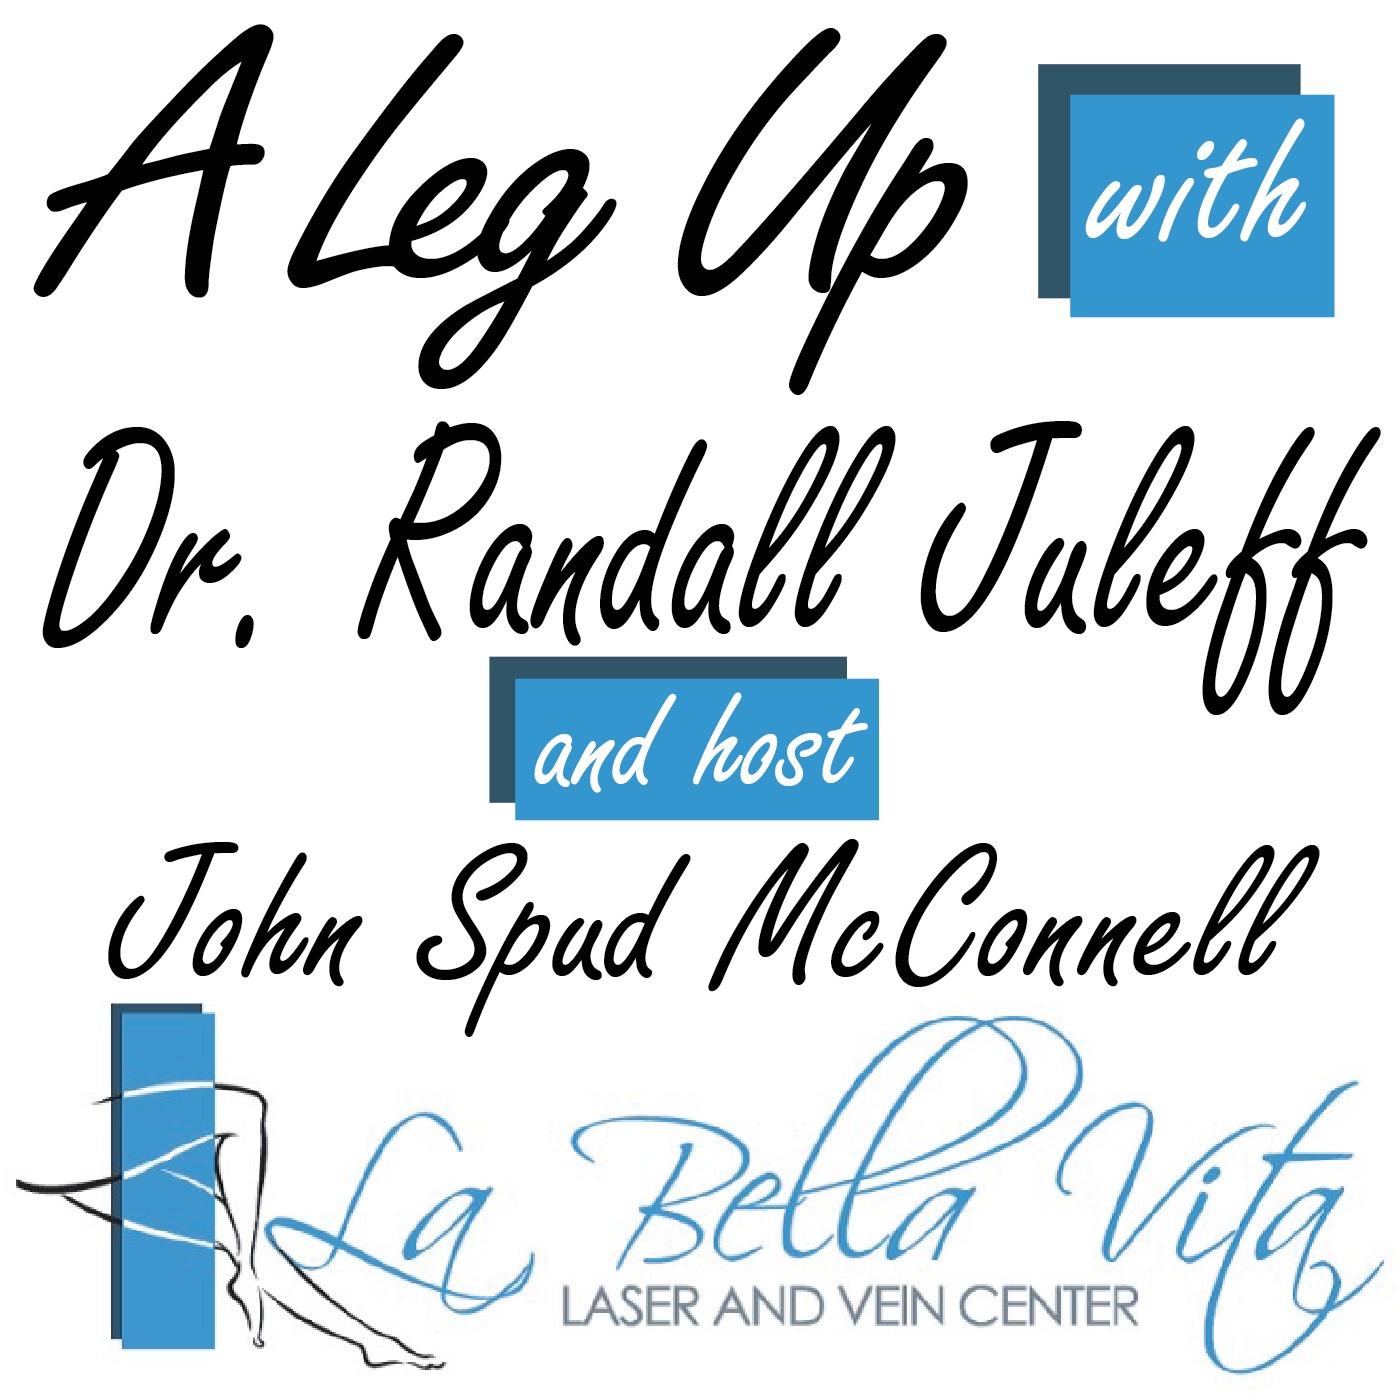 A LEG UP with DR RANDALL JULEFF